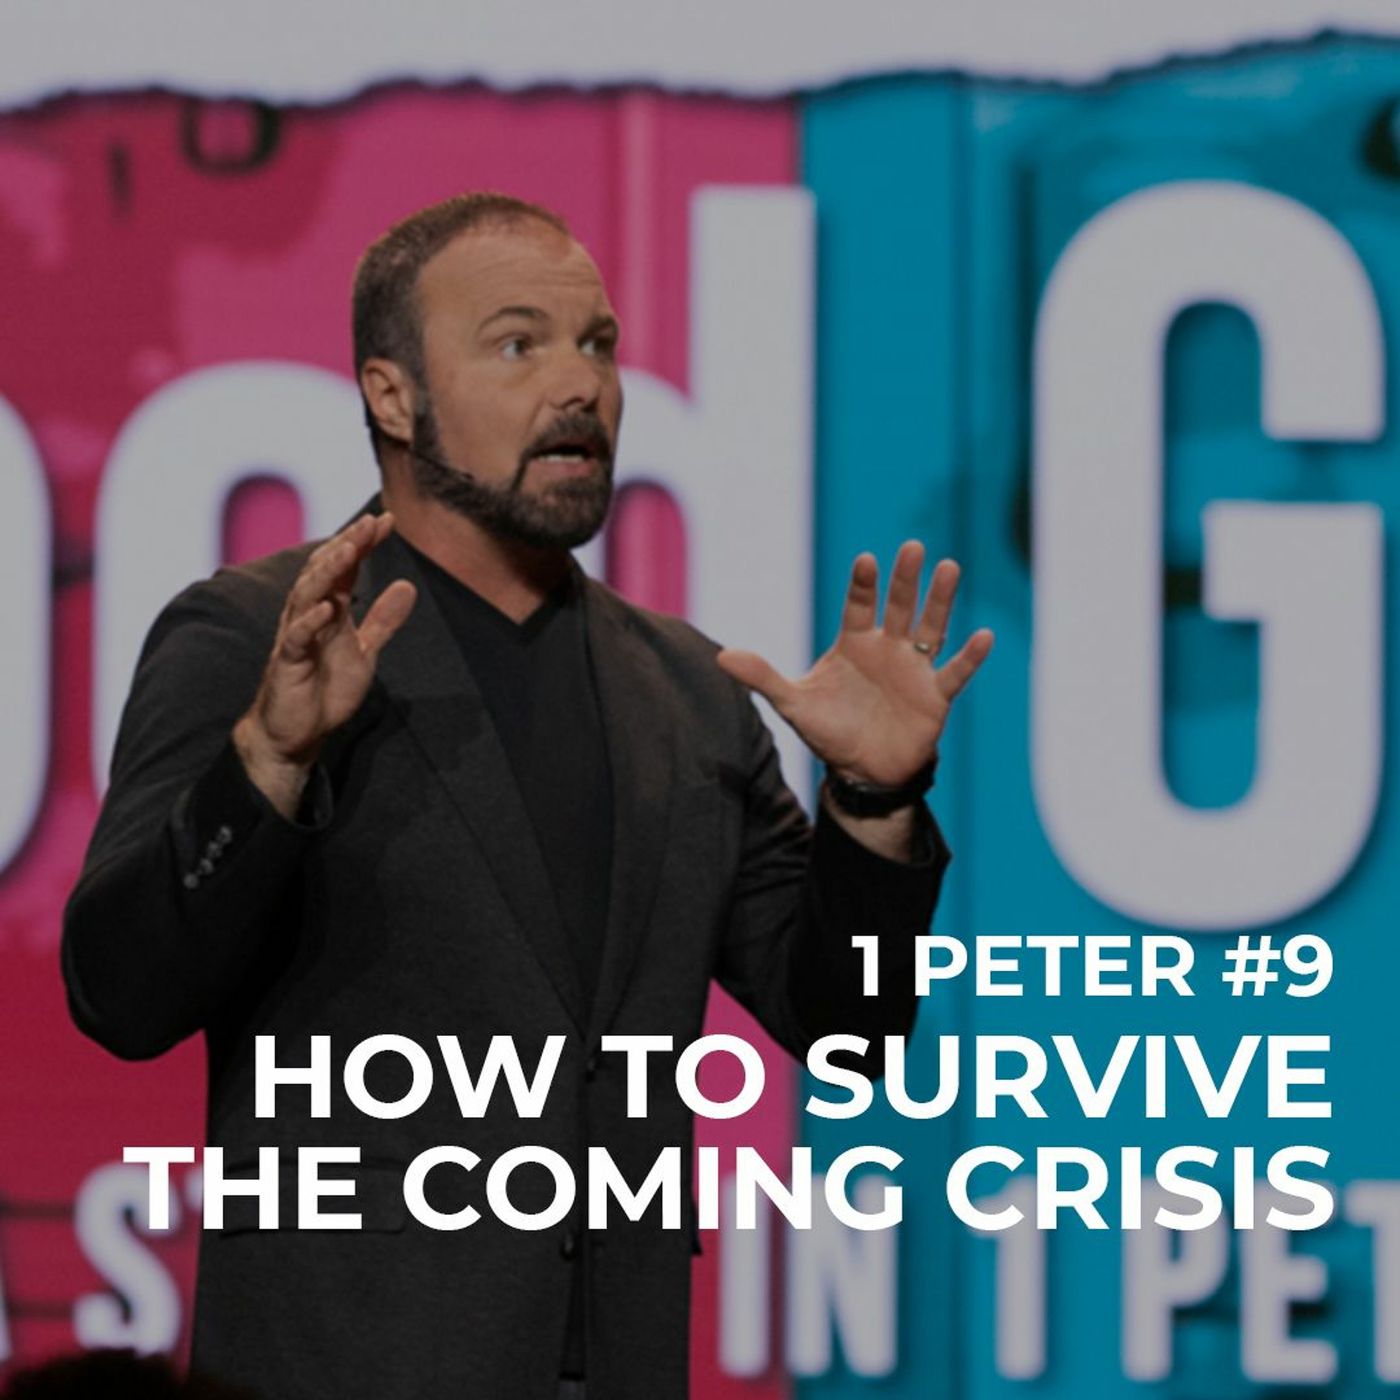 1st Peter #9 - How to Survive the Coming Crisis